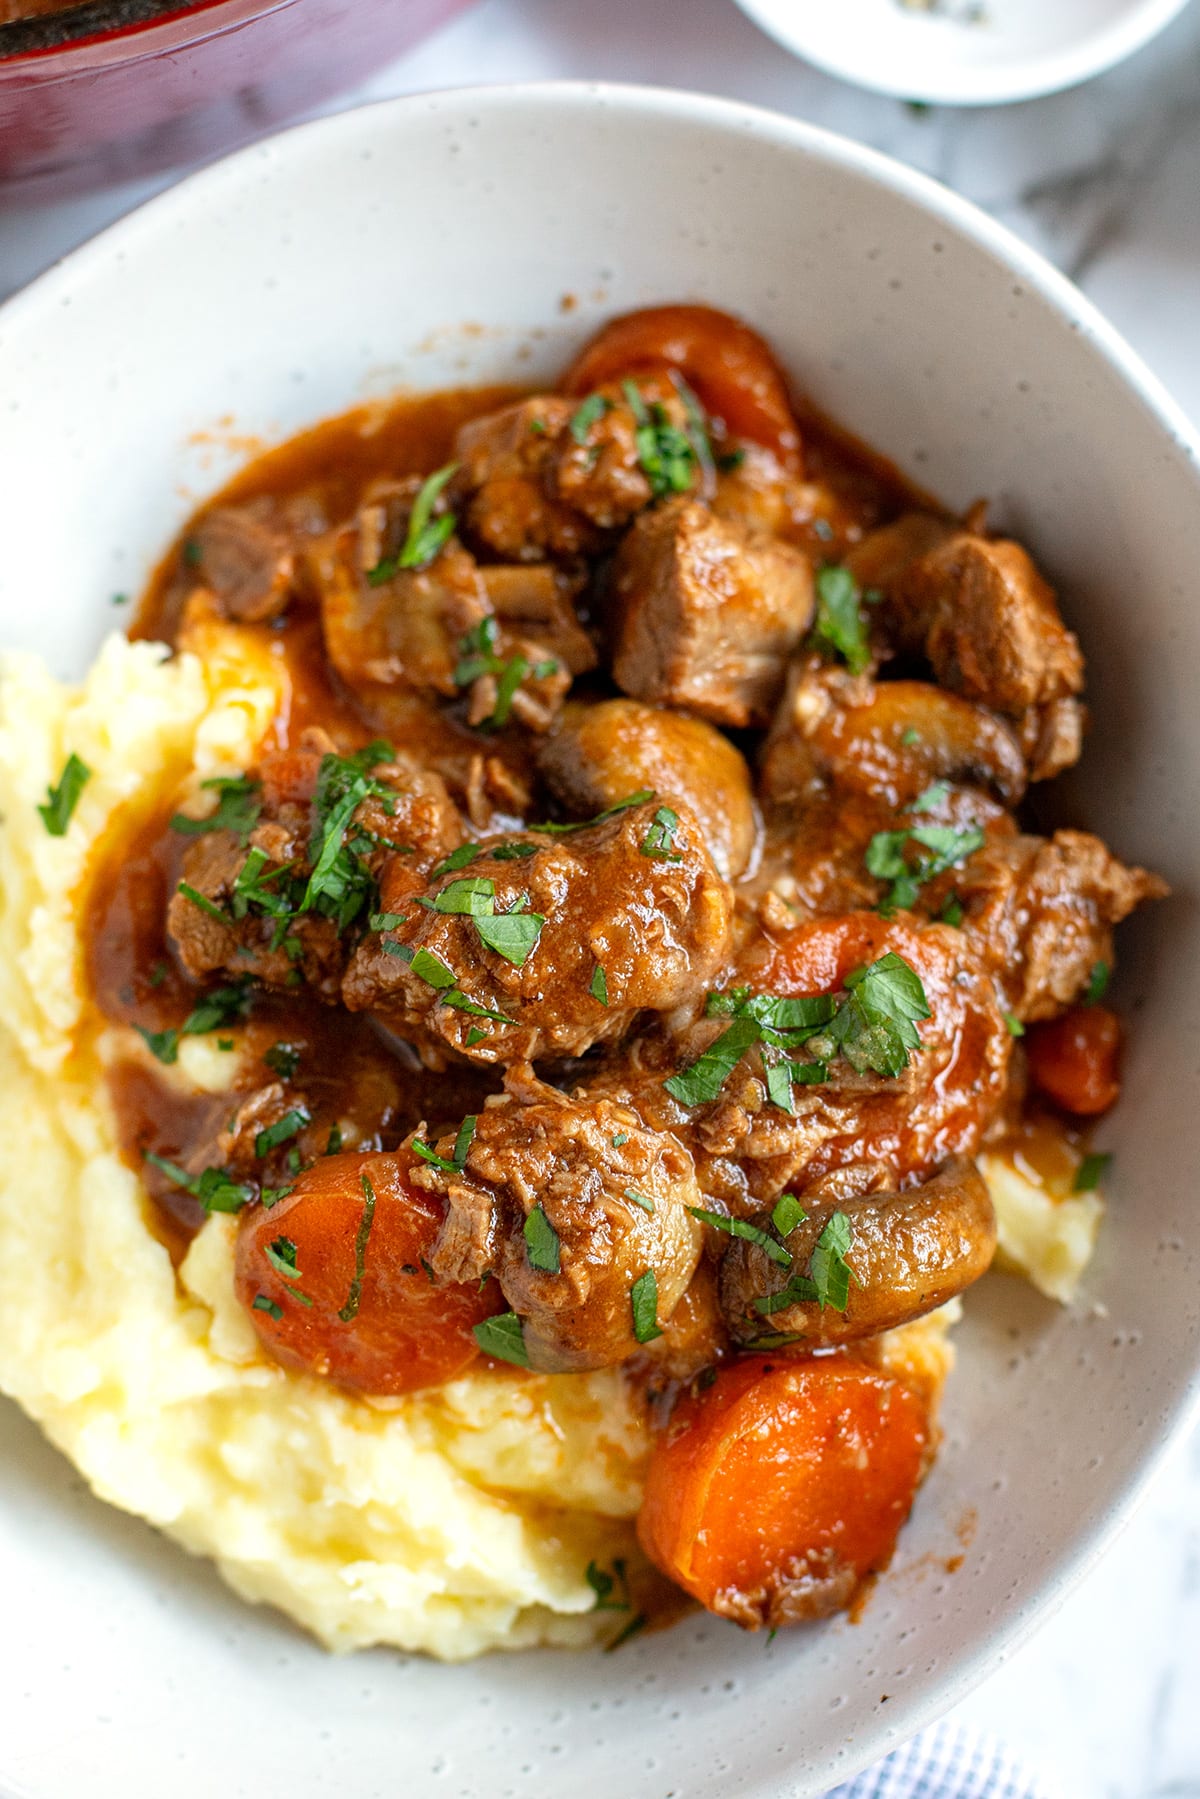 Beef stew with mushrooms and carrots